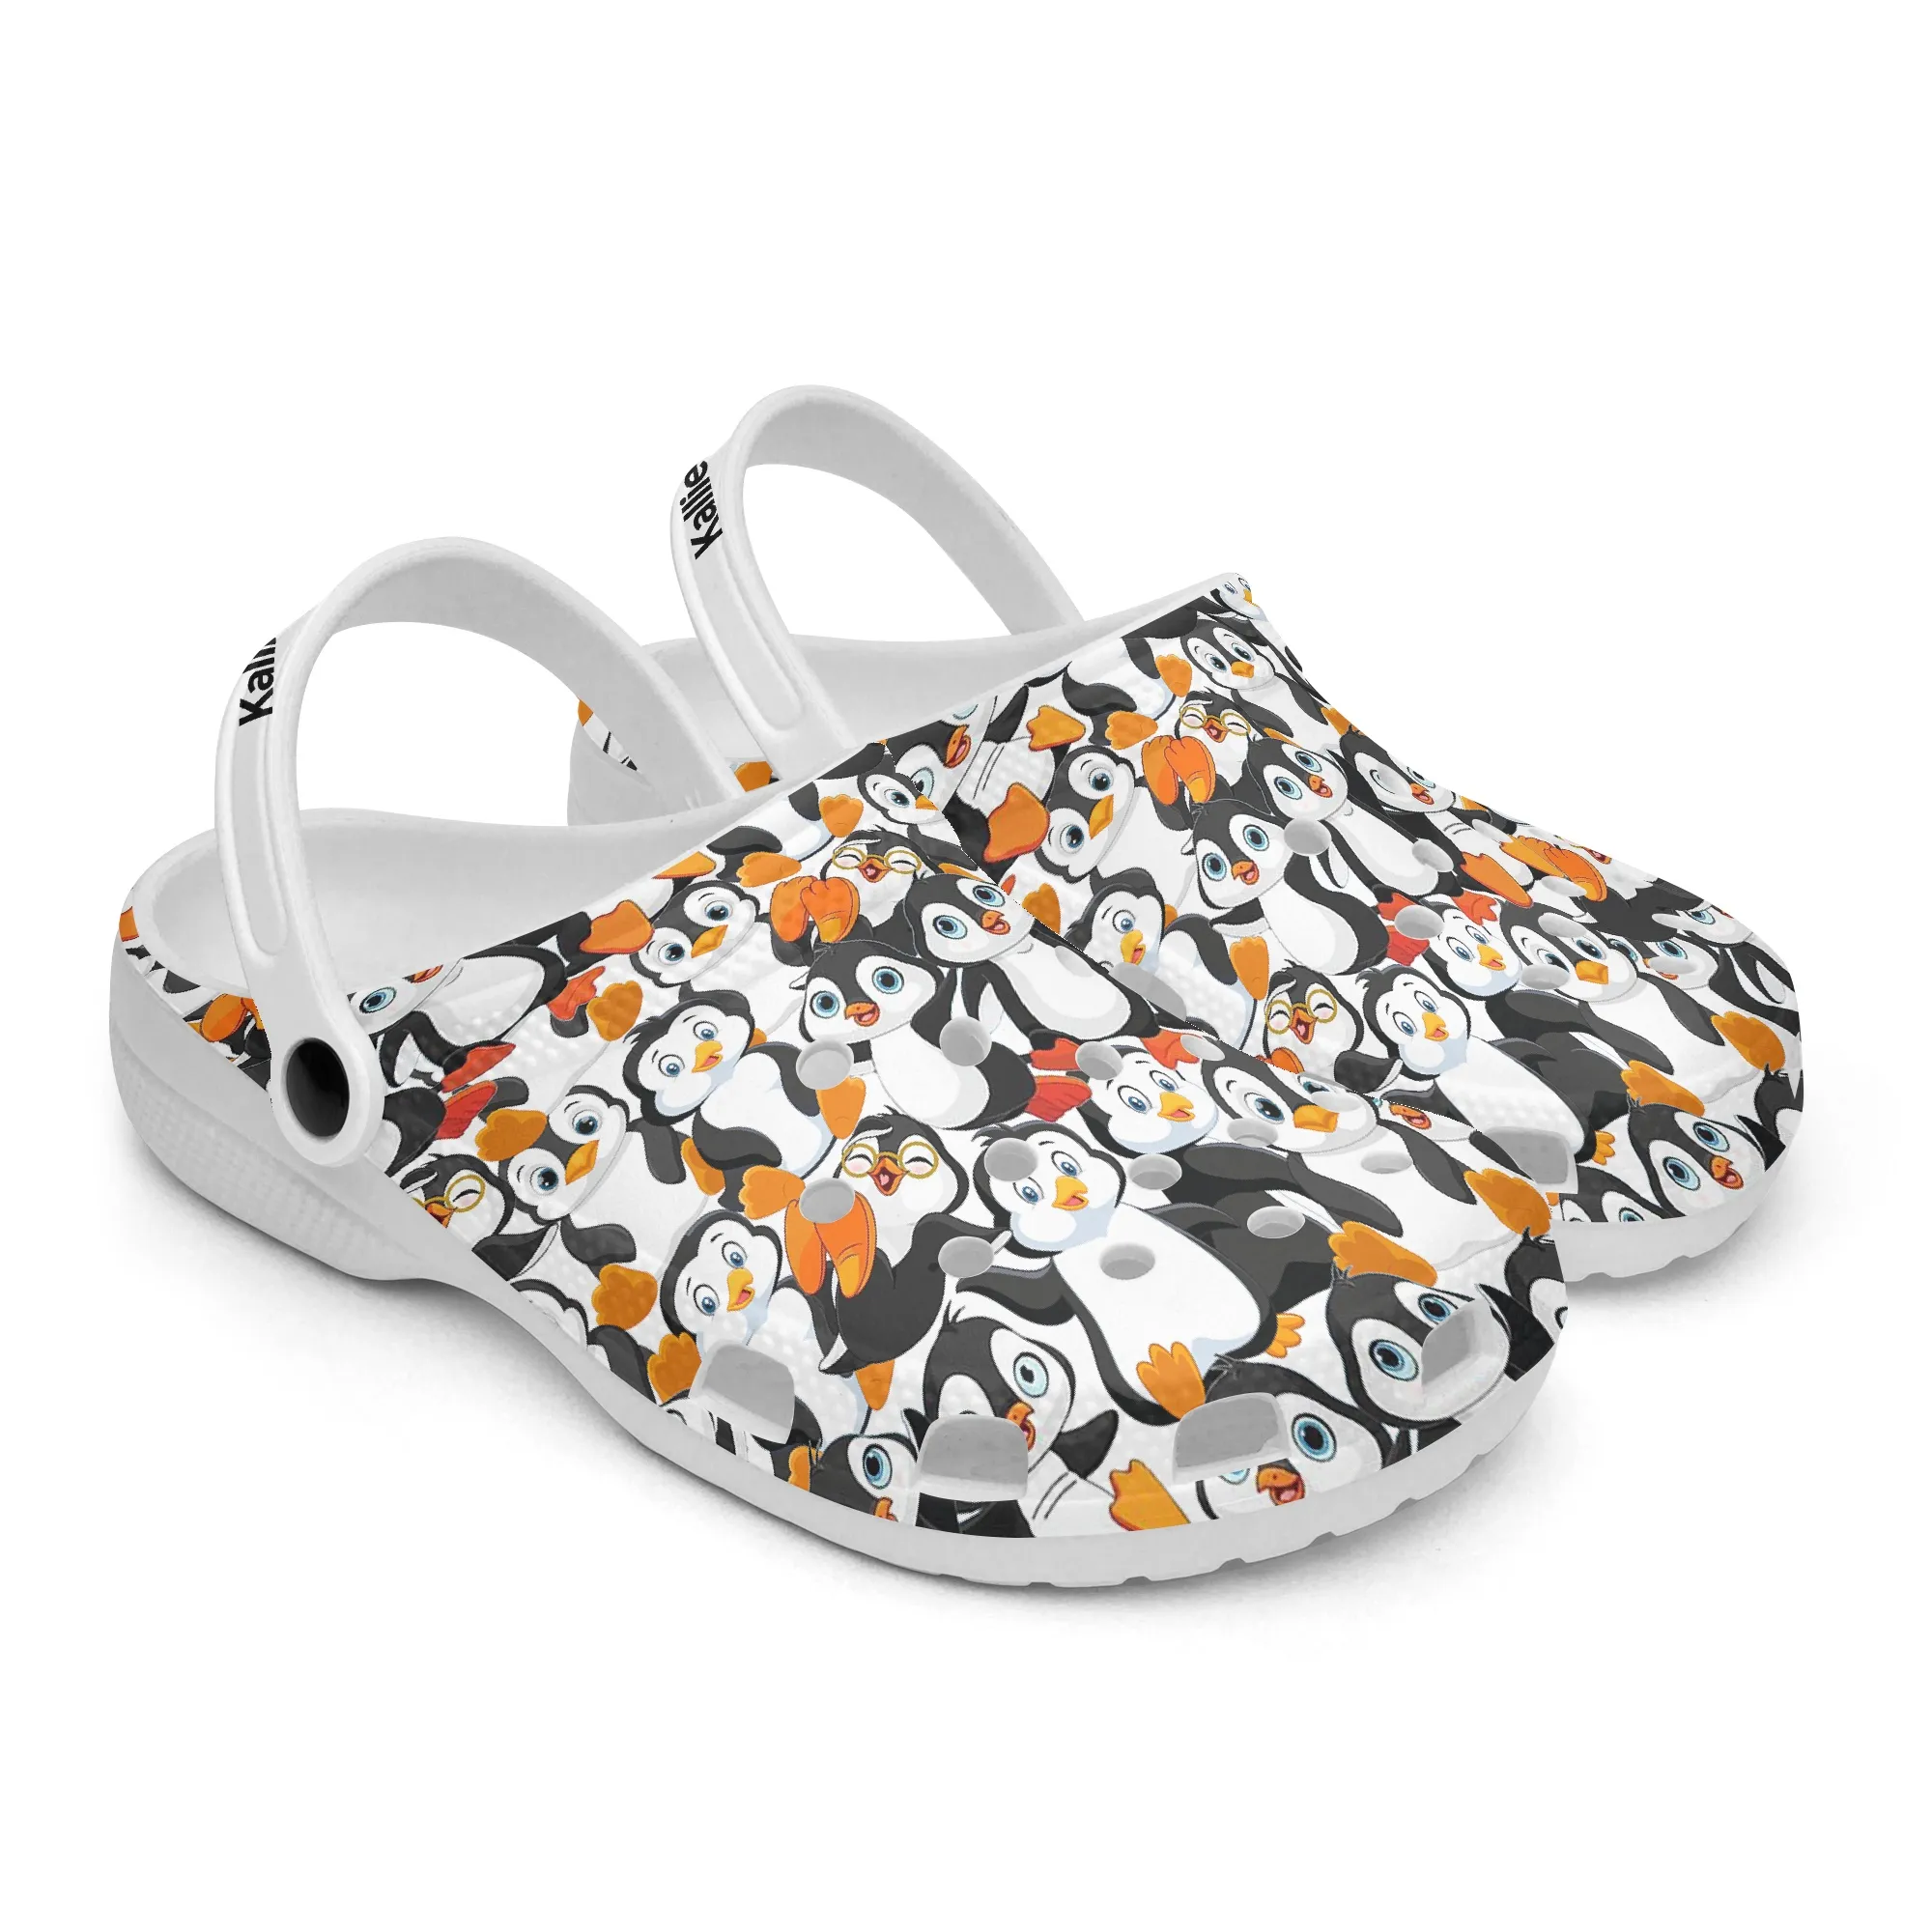 diy shoes classics slippers mens womens Custom Pattern fashion Lovely Penguin outdoor sneakers trend 36-45 37-92586